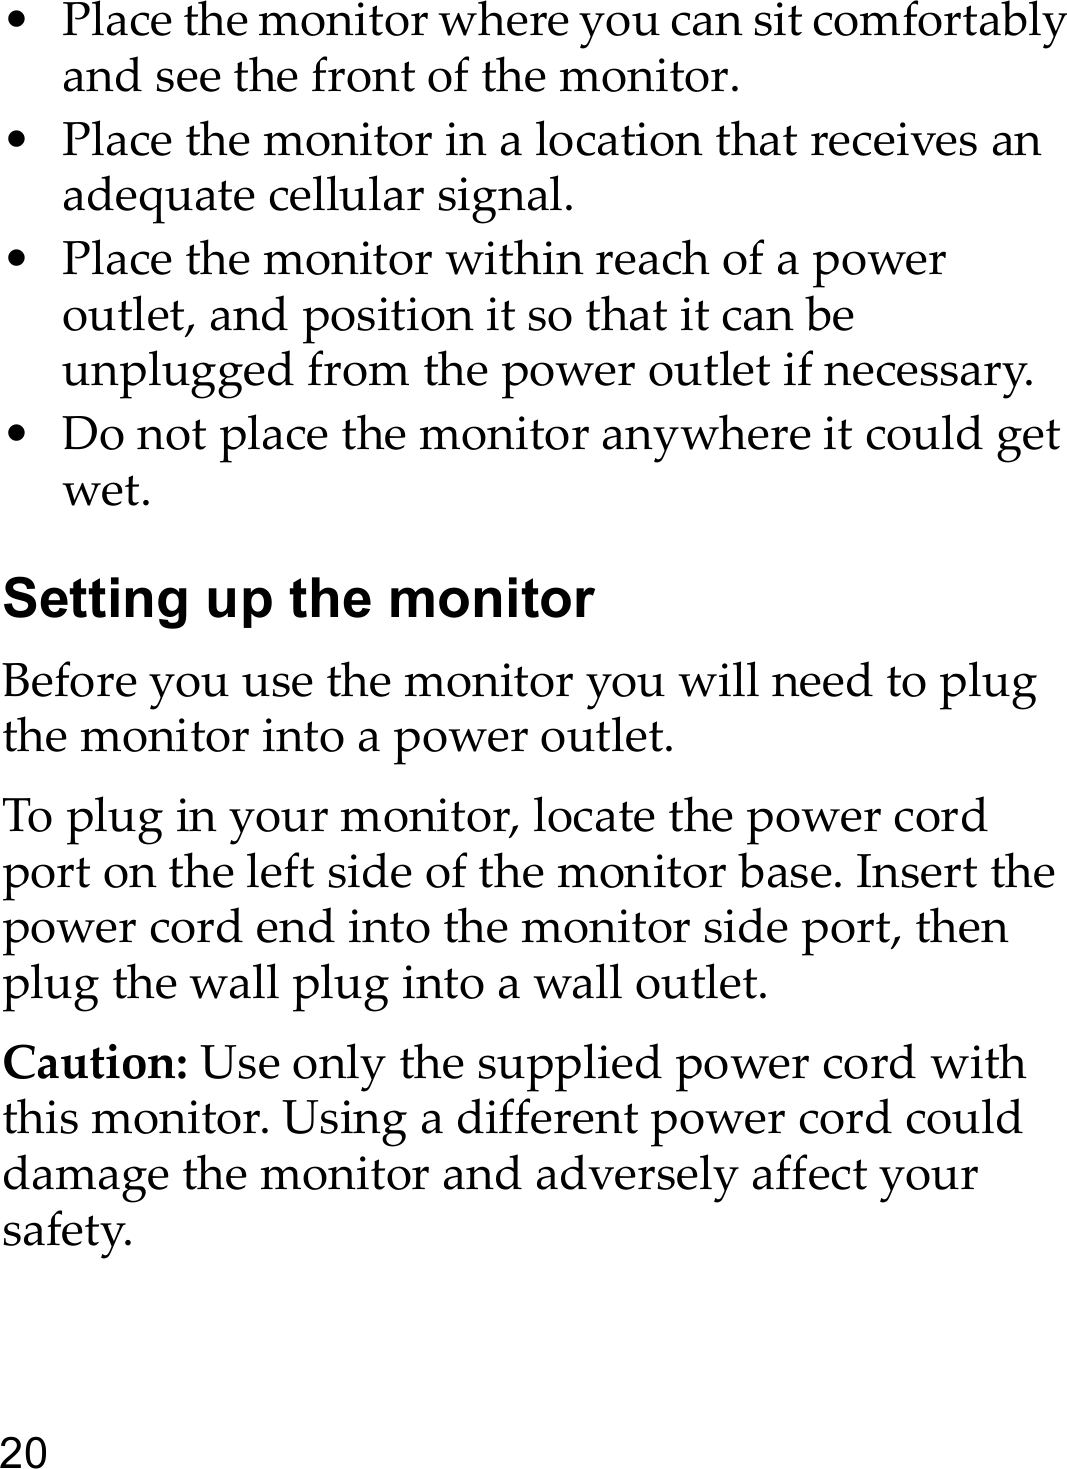 20• Place the monitor where you can sit comfortably and see the front of the monitor.• Place the monitor in a location that receives an adequate cellular signal.• Place the monitor within reach of a power outlet, and position it so that it can be unplugged from the power outlet if necessary.• Do not place the monitor anywhere it could get wet.Setting up the monitorBefore you use the monitor you will need to plug the monitor into a power outlet. To plug in your monitor, locate the power cord port on the left side of the monitor base. Insert the power cord end into the monitor side port, then plug the wall plug into a wall outlet.Caution: Use only the supplied power cord with this monitor. Using a different power cord could damage the monitor and adversely affect your safety.